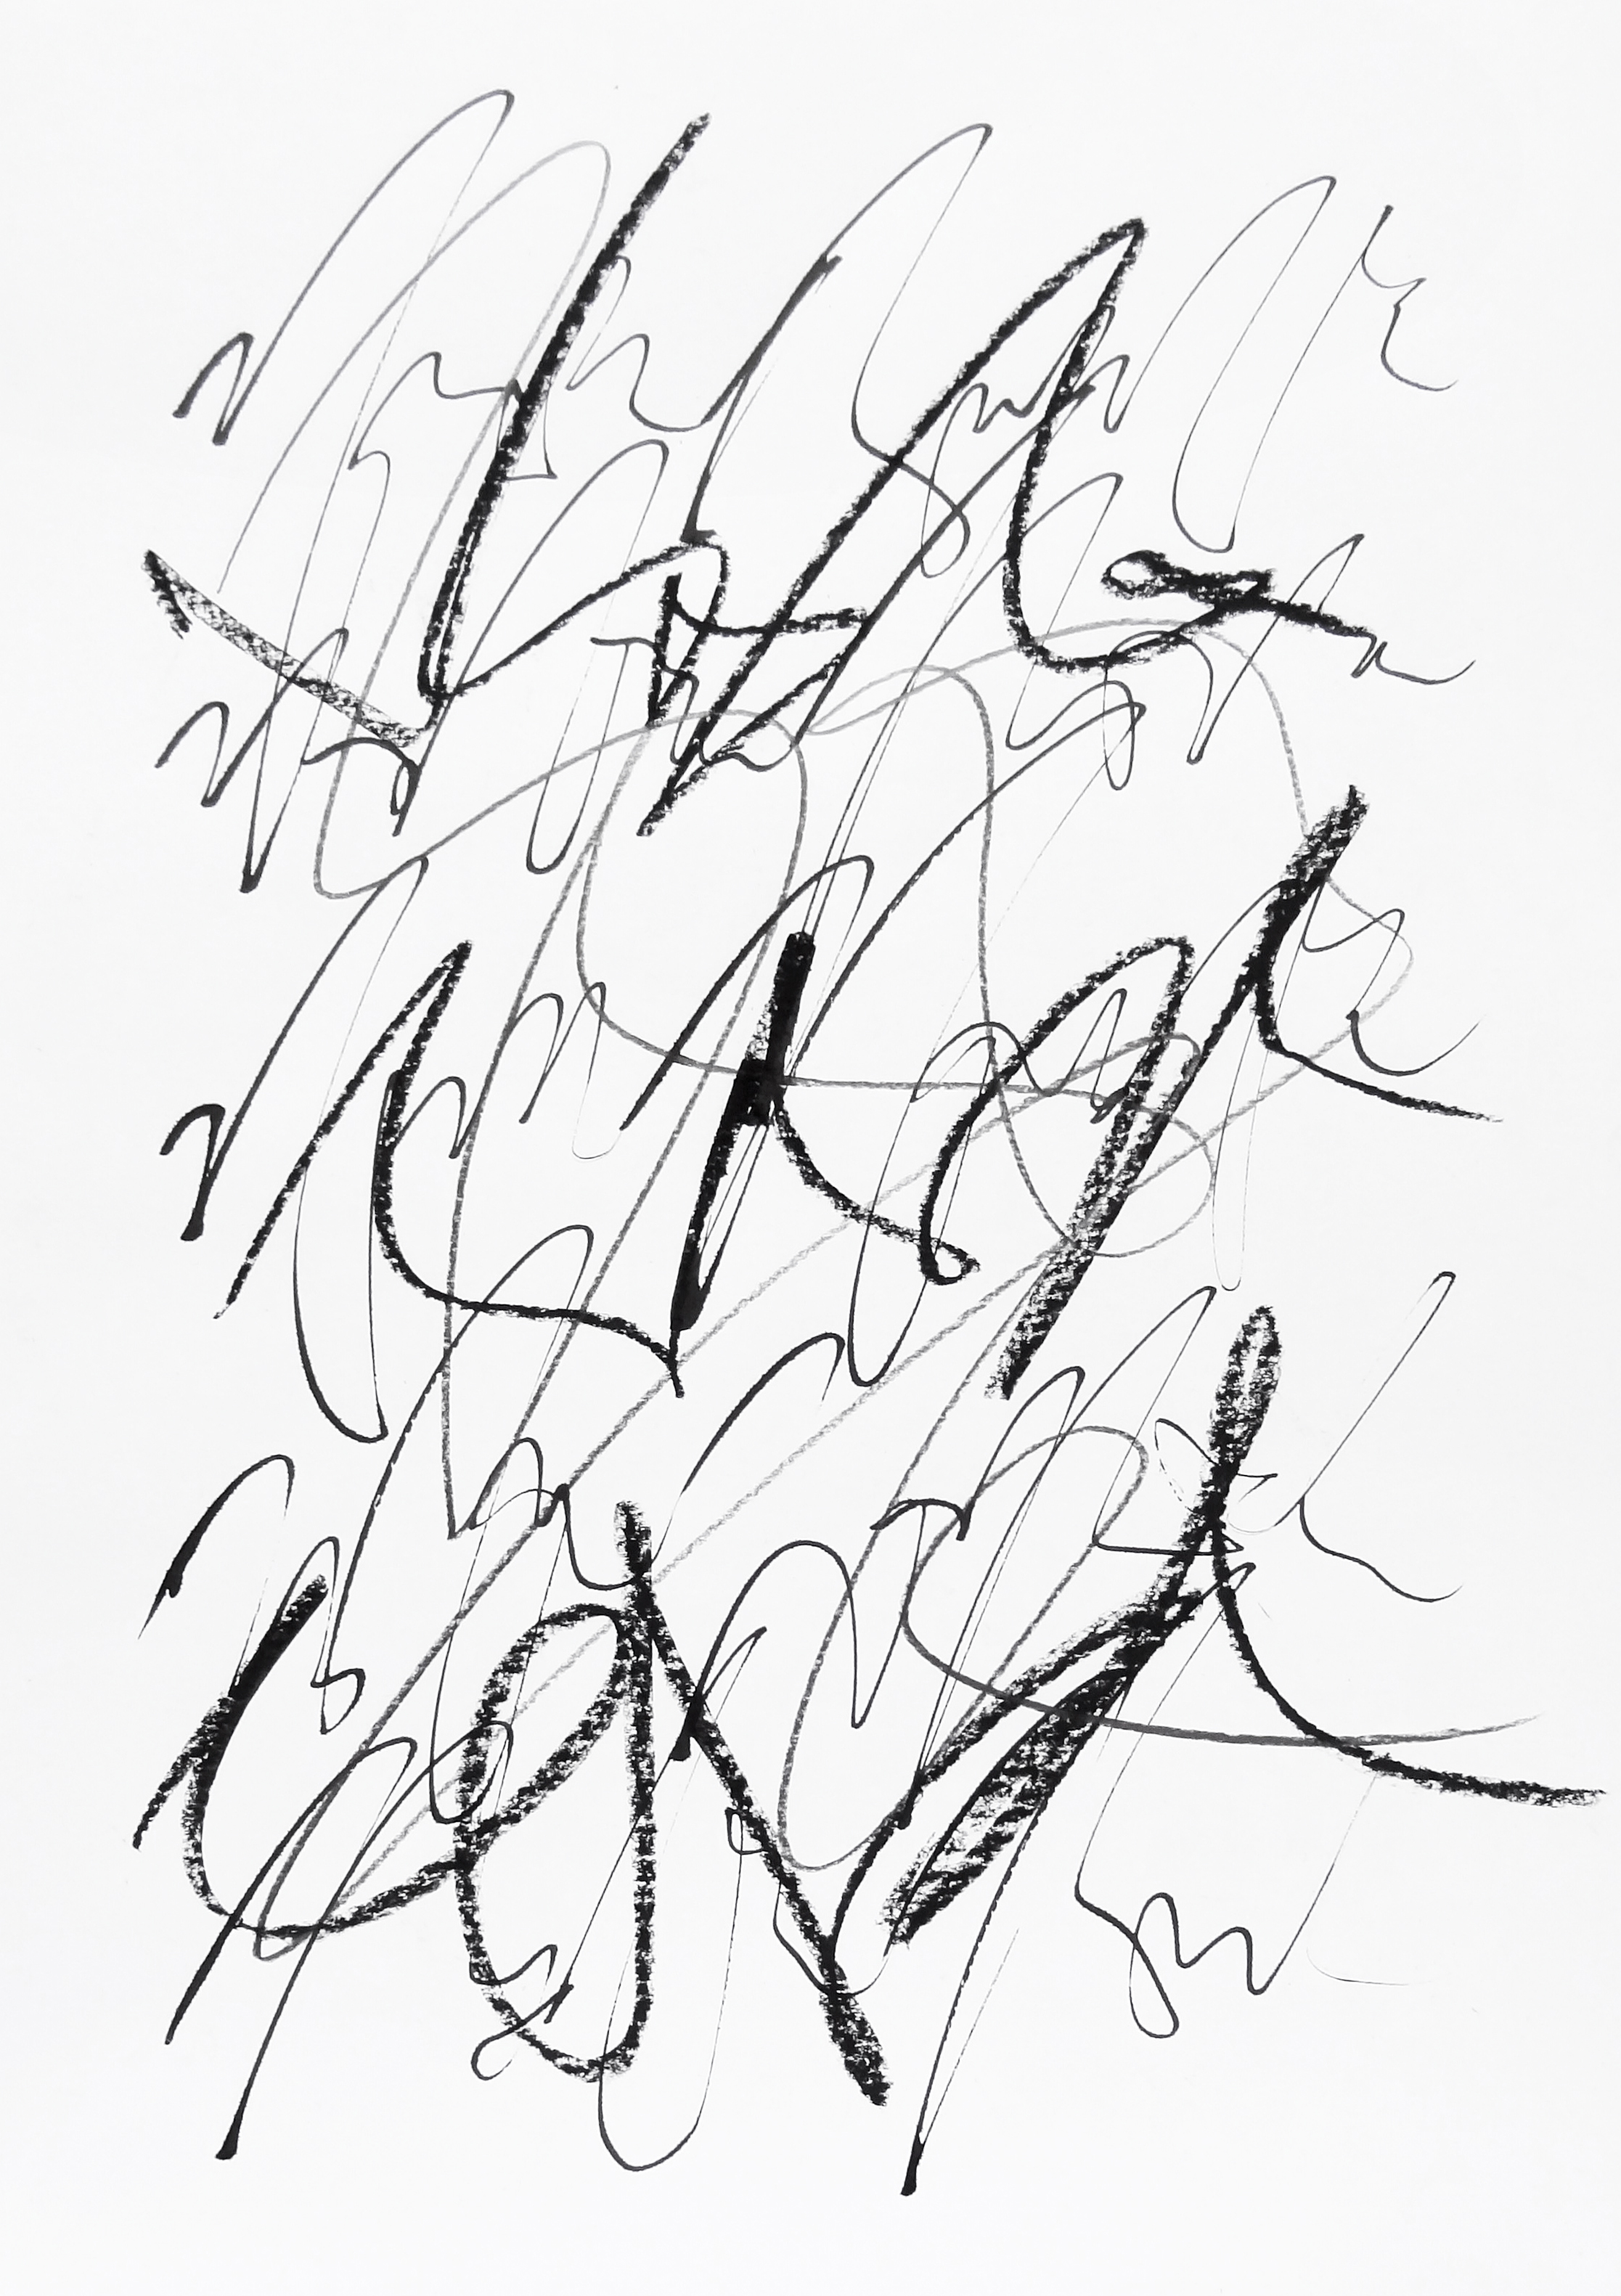  rhythm and flow studies, 2019 calligraphy ink, pencil and chalk on paper 42,0 x 29,7 cm (14-19) 